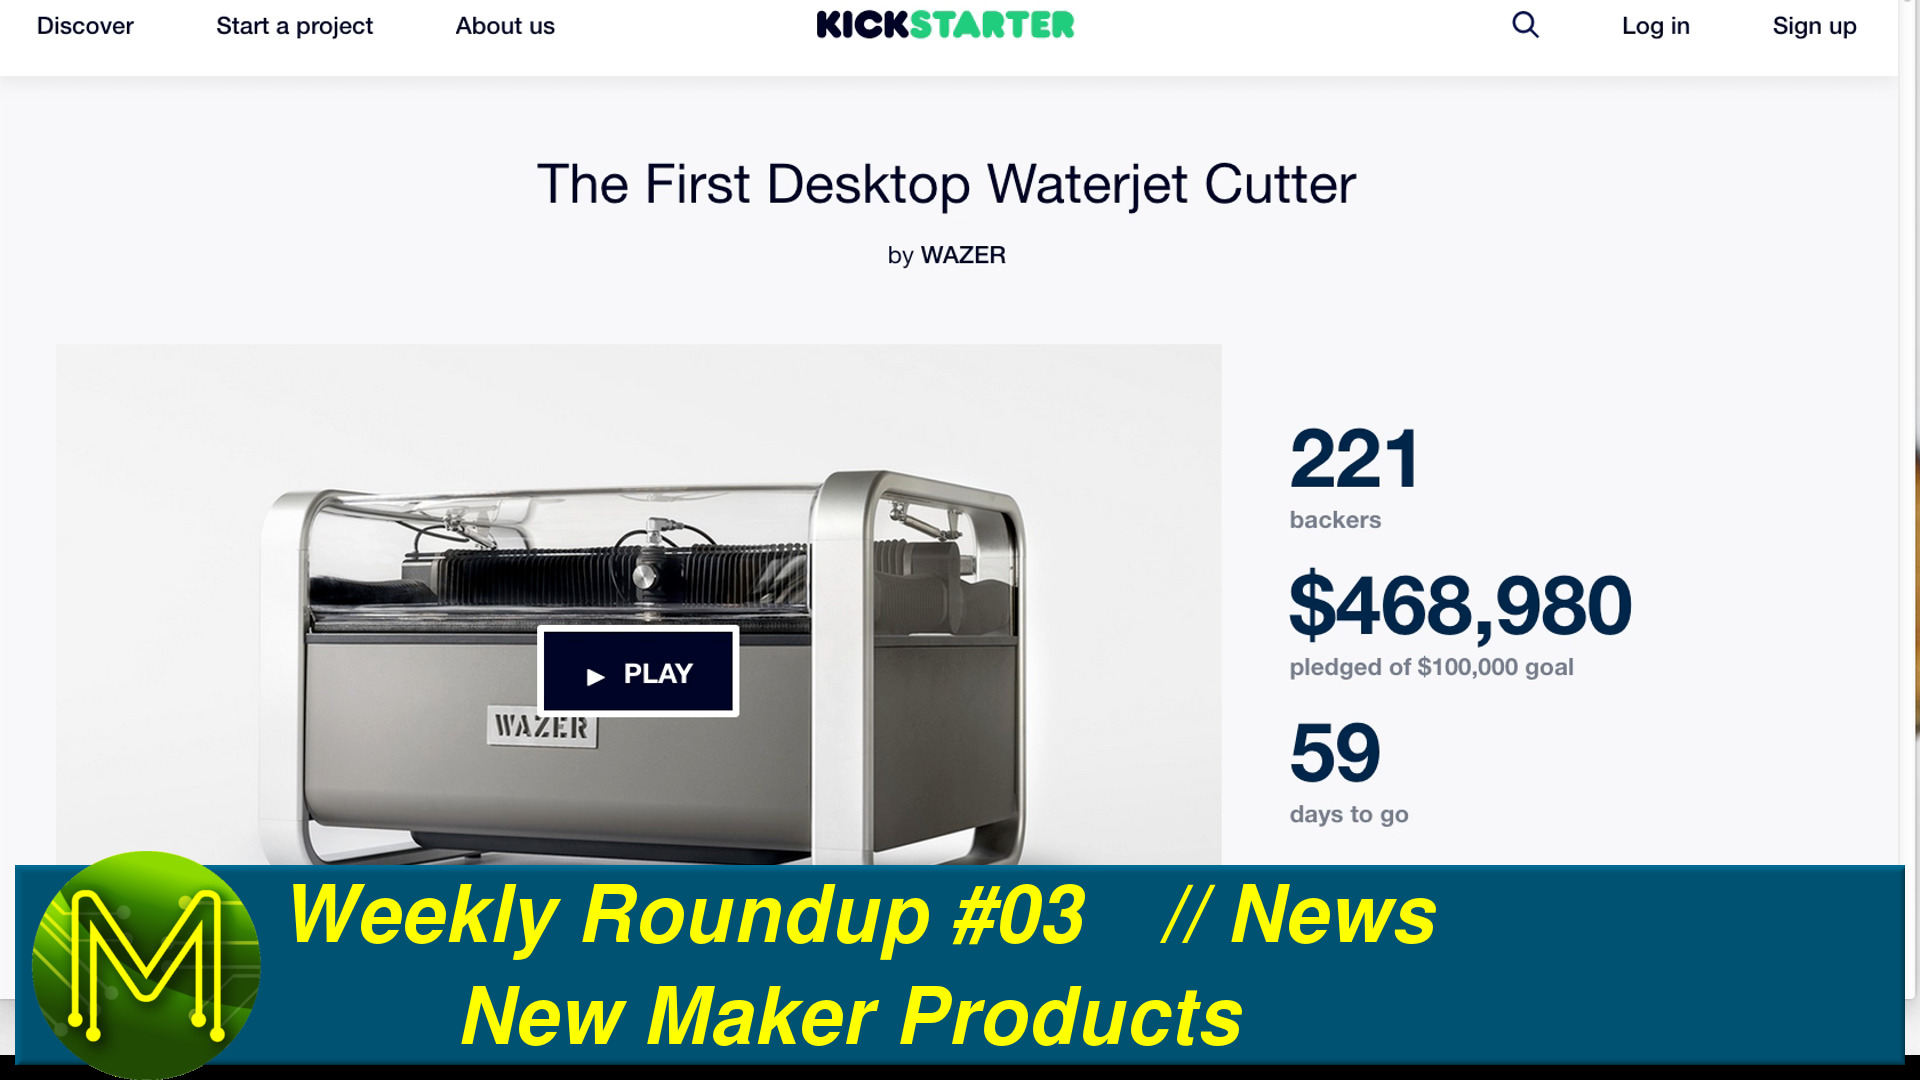 Weekly Roundup #03 - New Maker Products // News